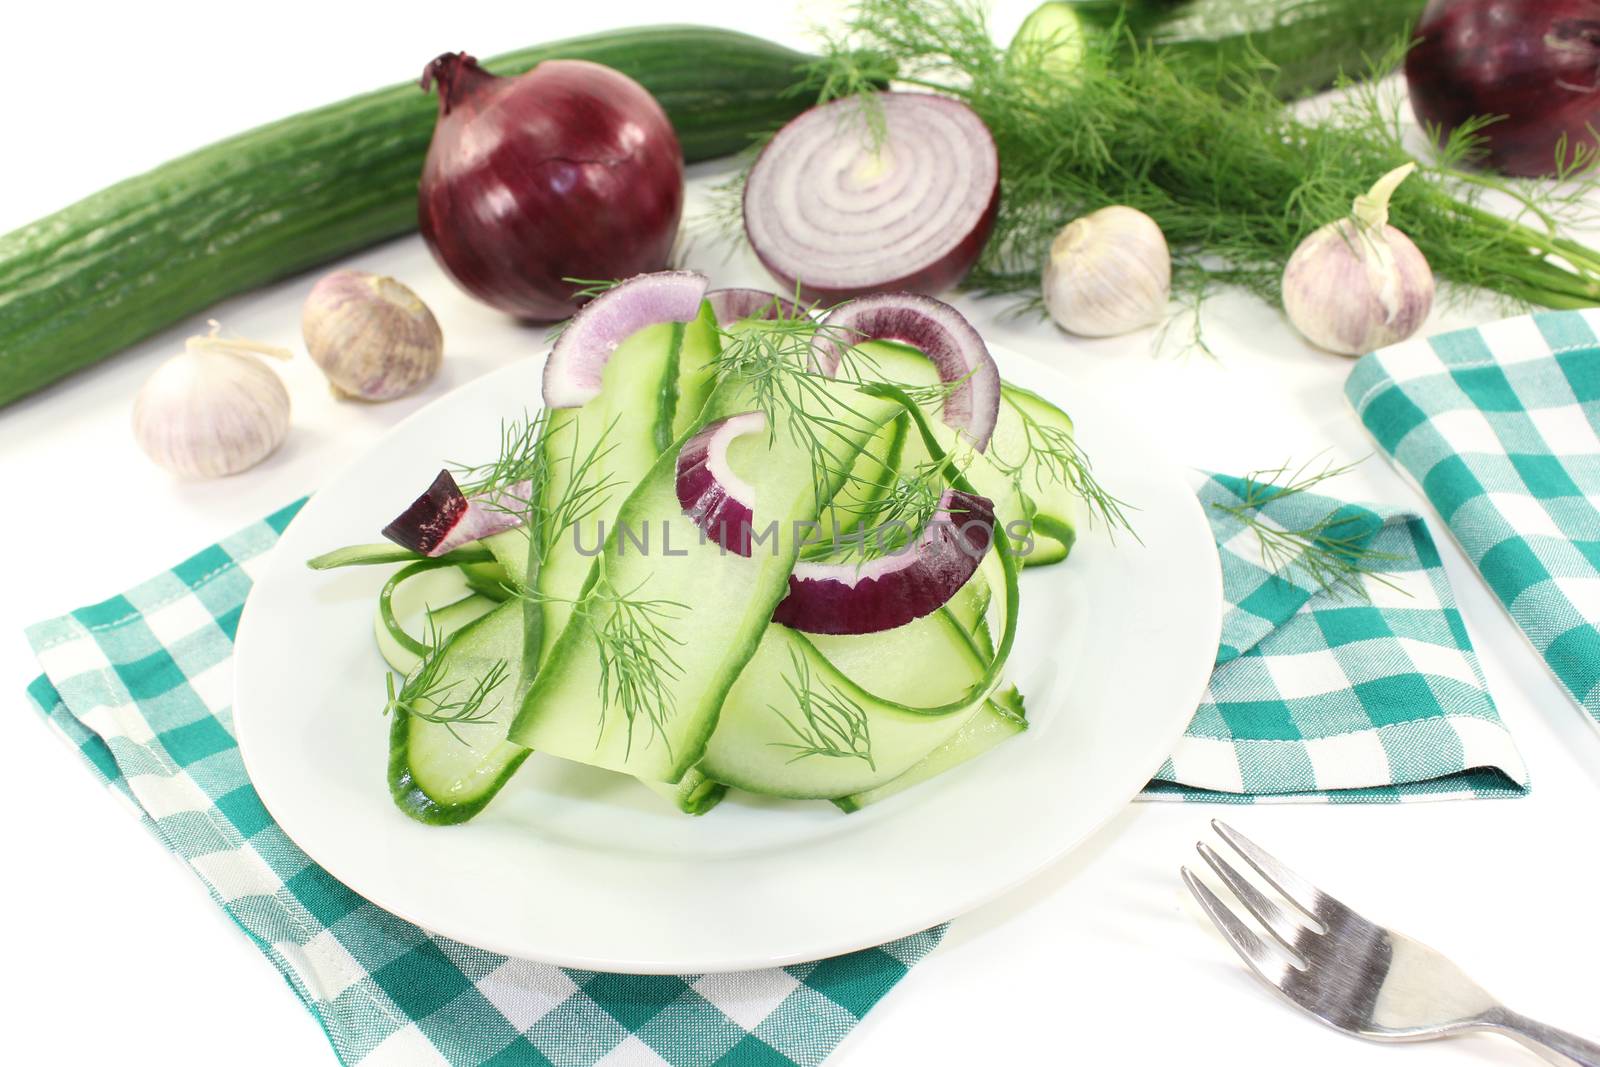 Cucumber salad with onions and dill on a plate